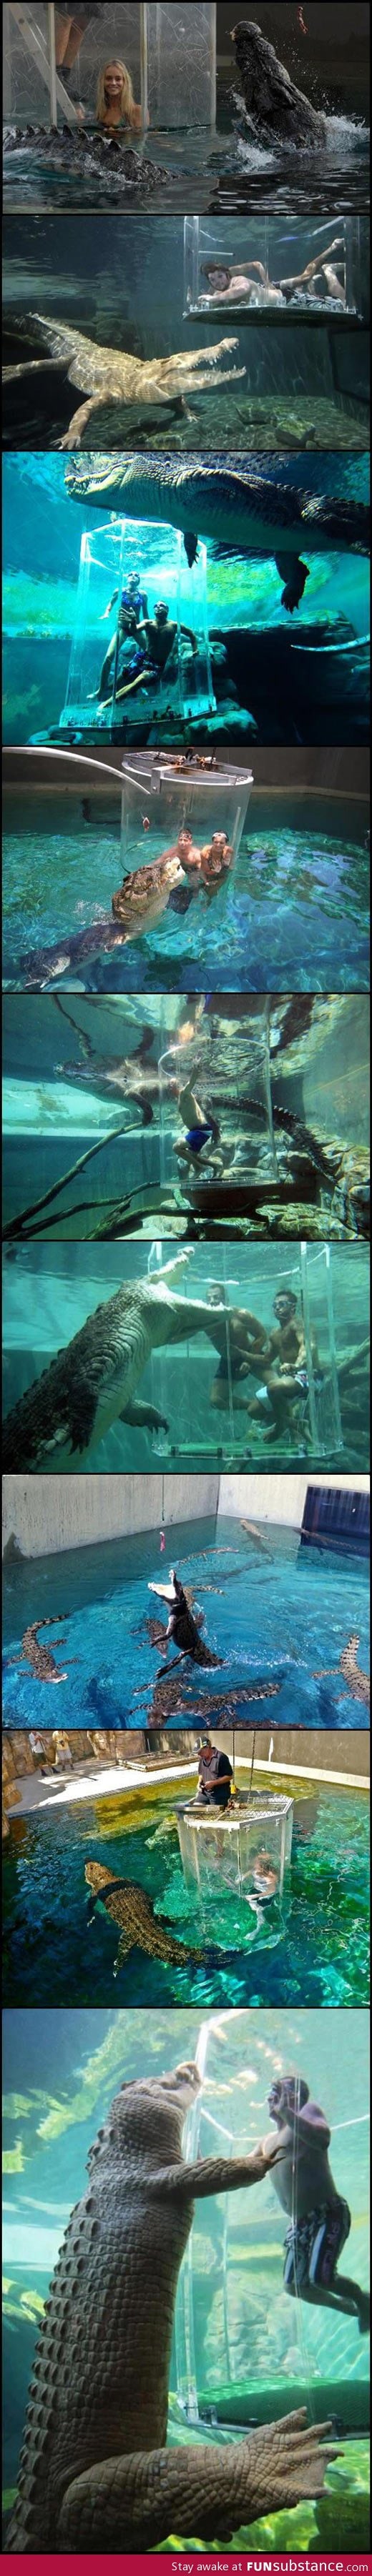 A terrifying place where you can swim with crocodiles